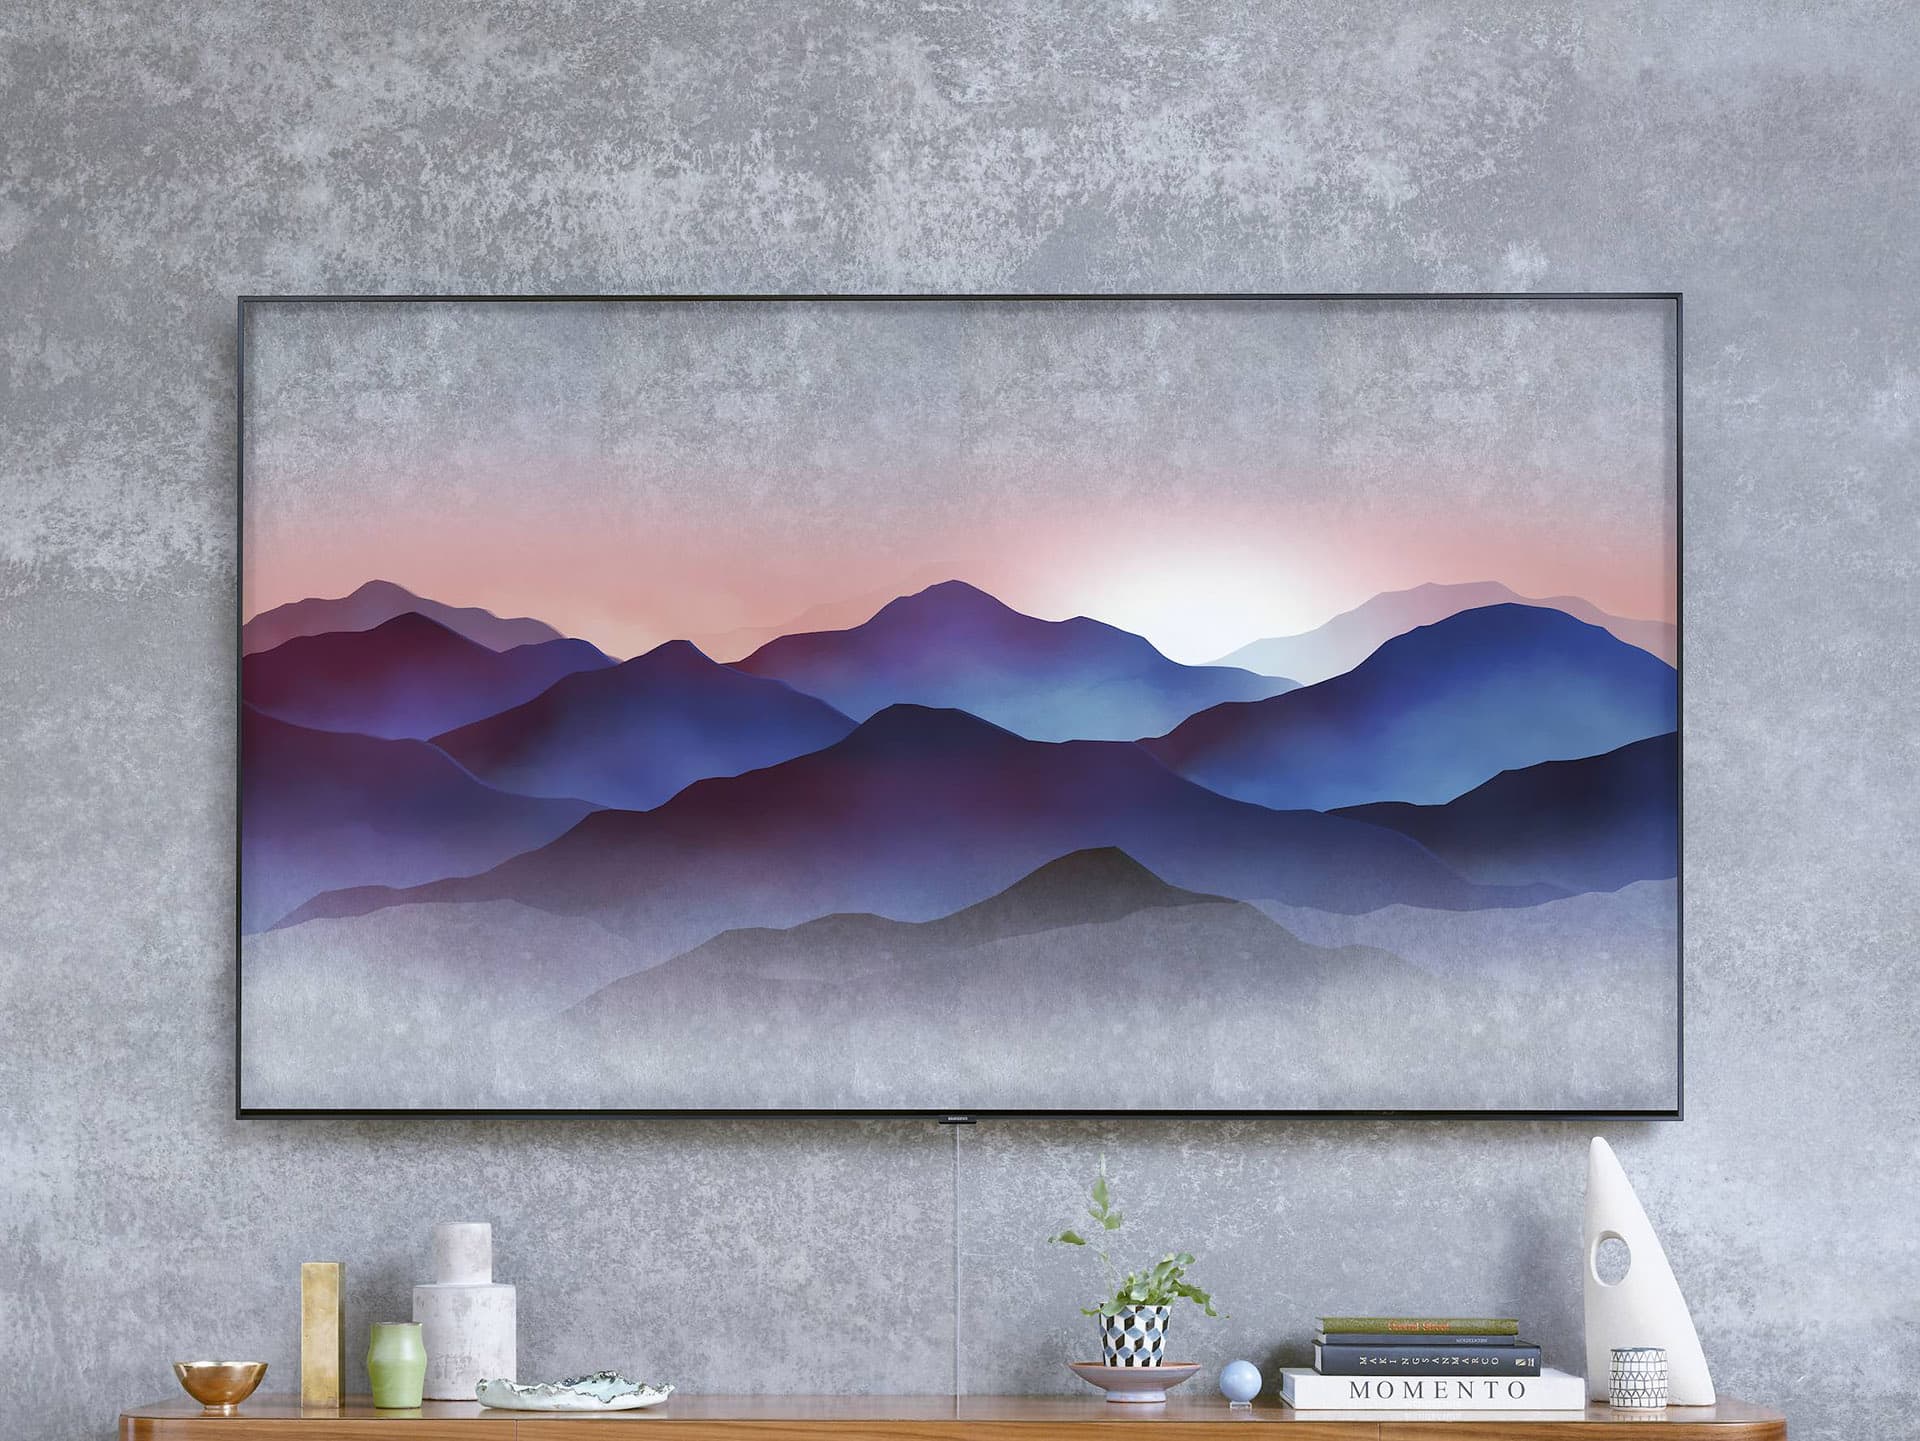 QLED TV Ambient Mode – Mountain